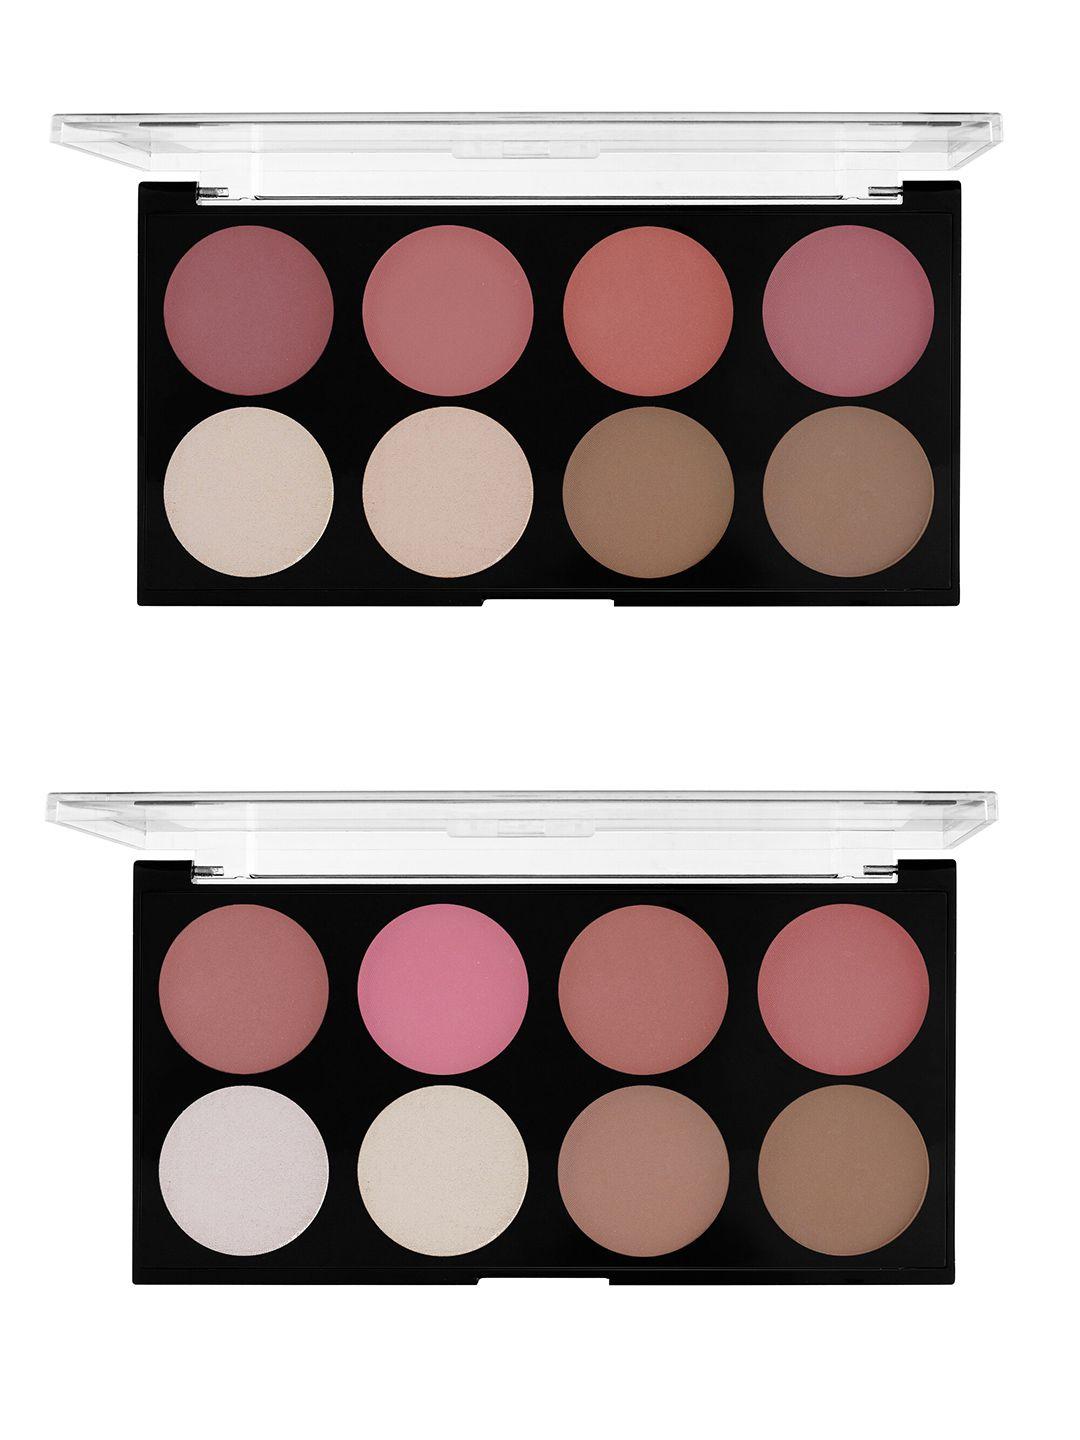 mars set of 2 fantasy matte blusher palette with highlighter and bronzer - 20g each -01-02